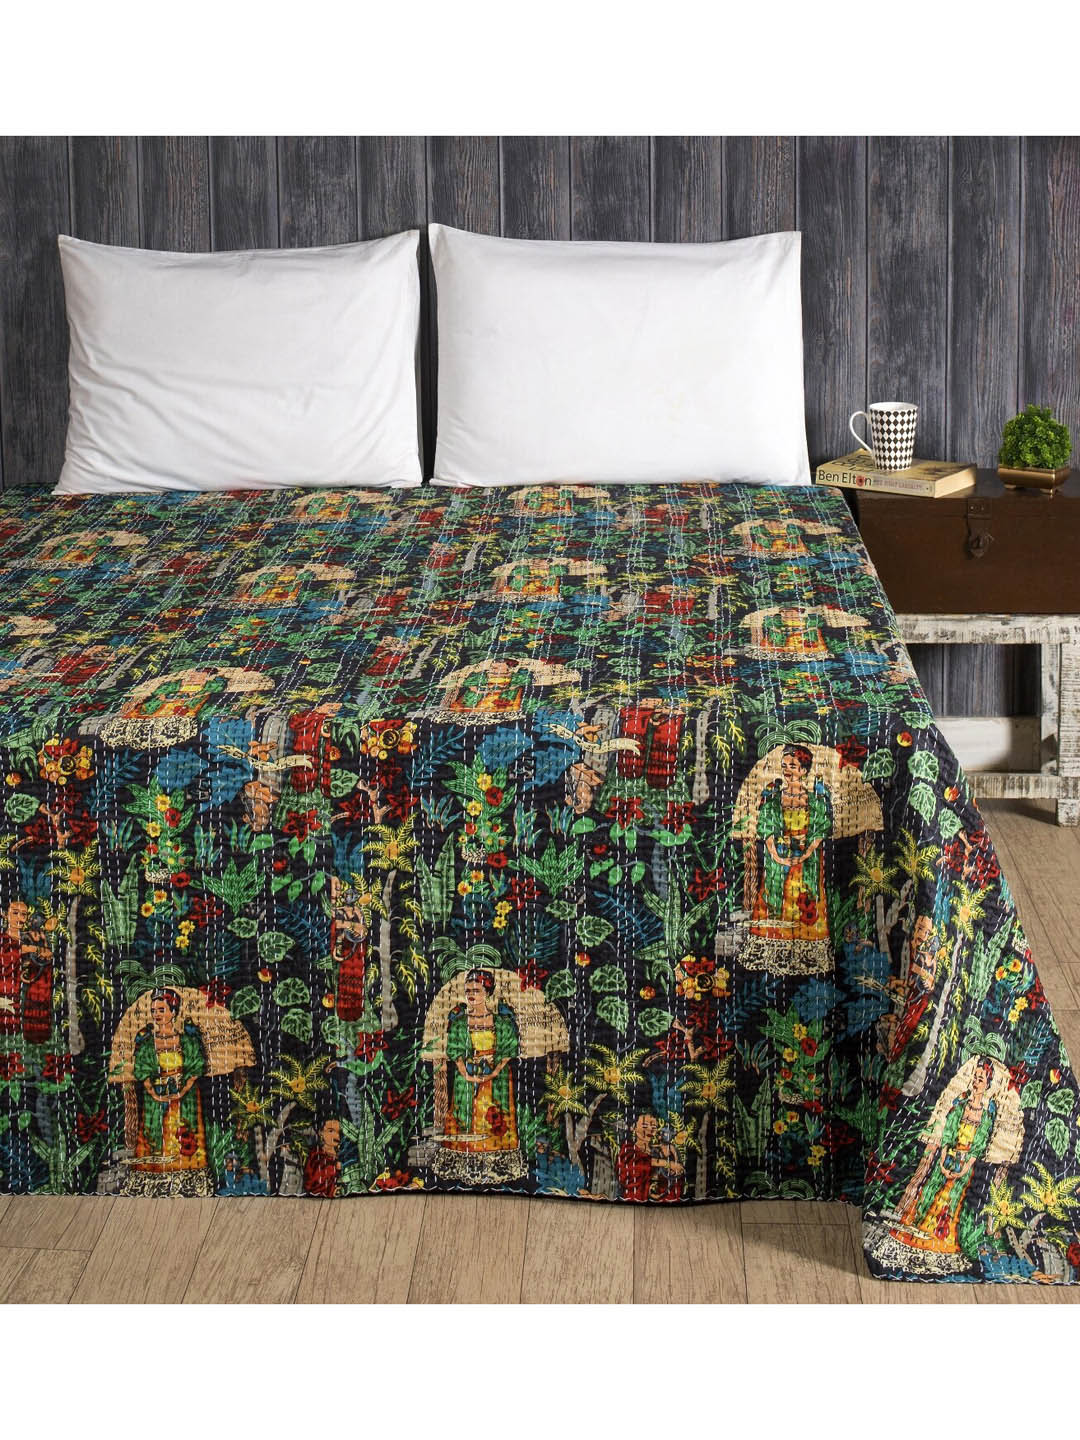 HANDICRAFT PALACE Black Printed Kantha Embroidered Cotton Double Queen Bed Cover Price in India